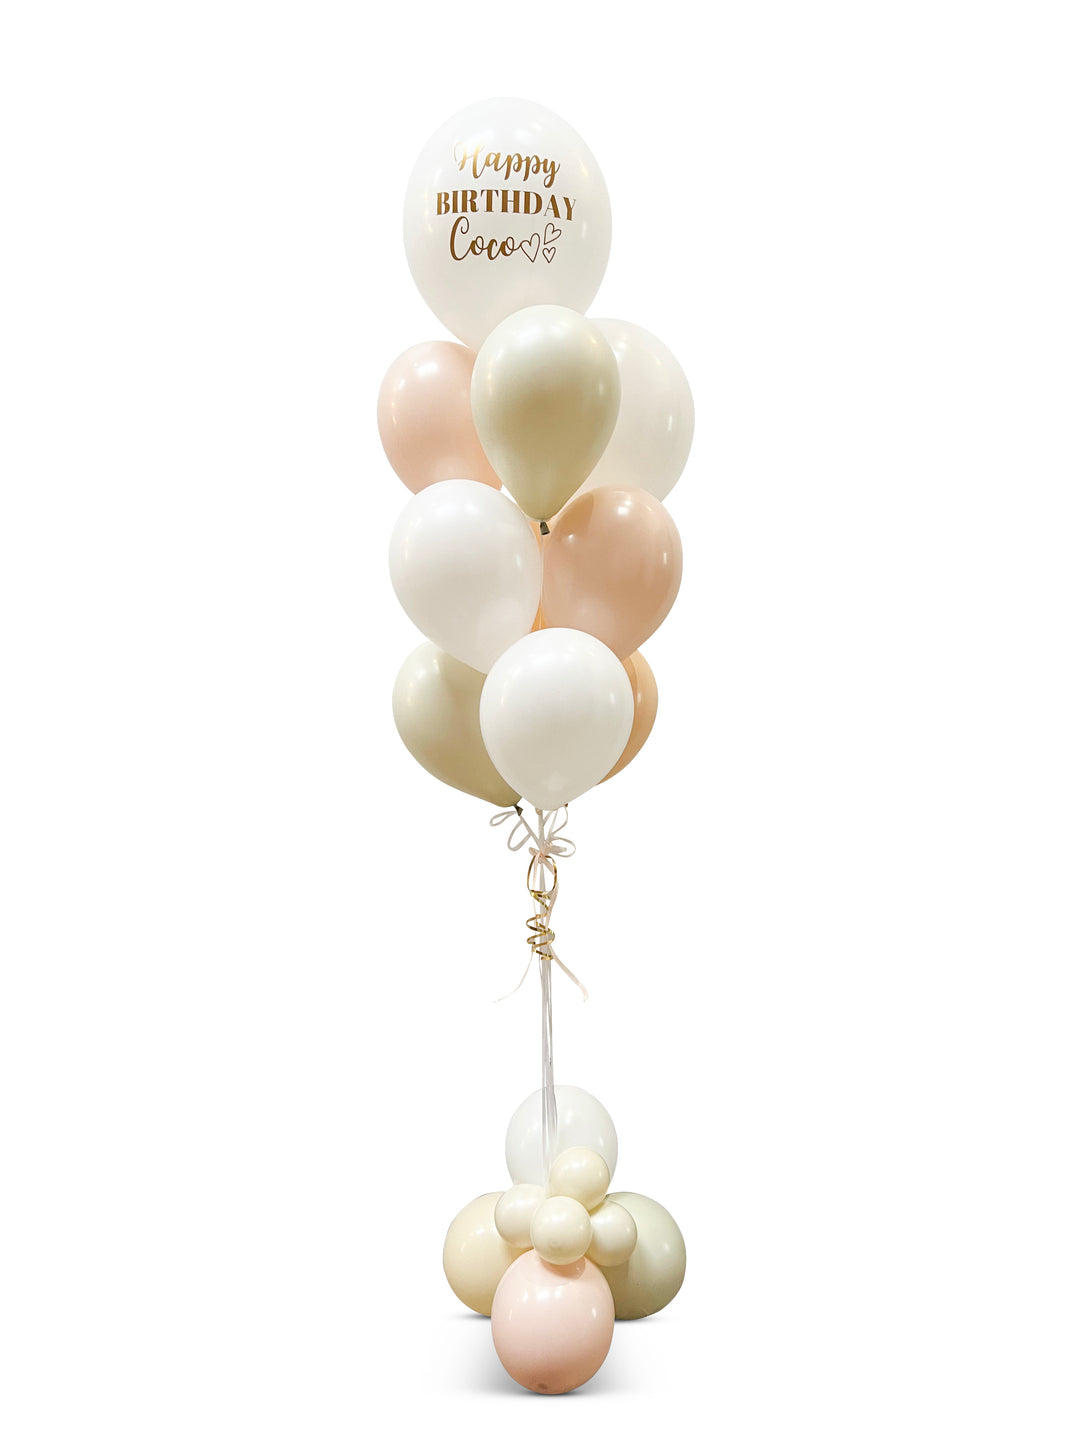 6 Ballons Blancs & Or Happy Birthday to You - Les Bambetises